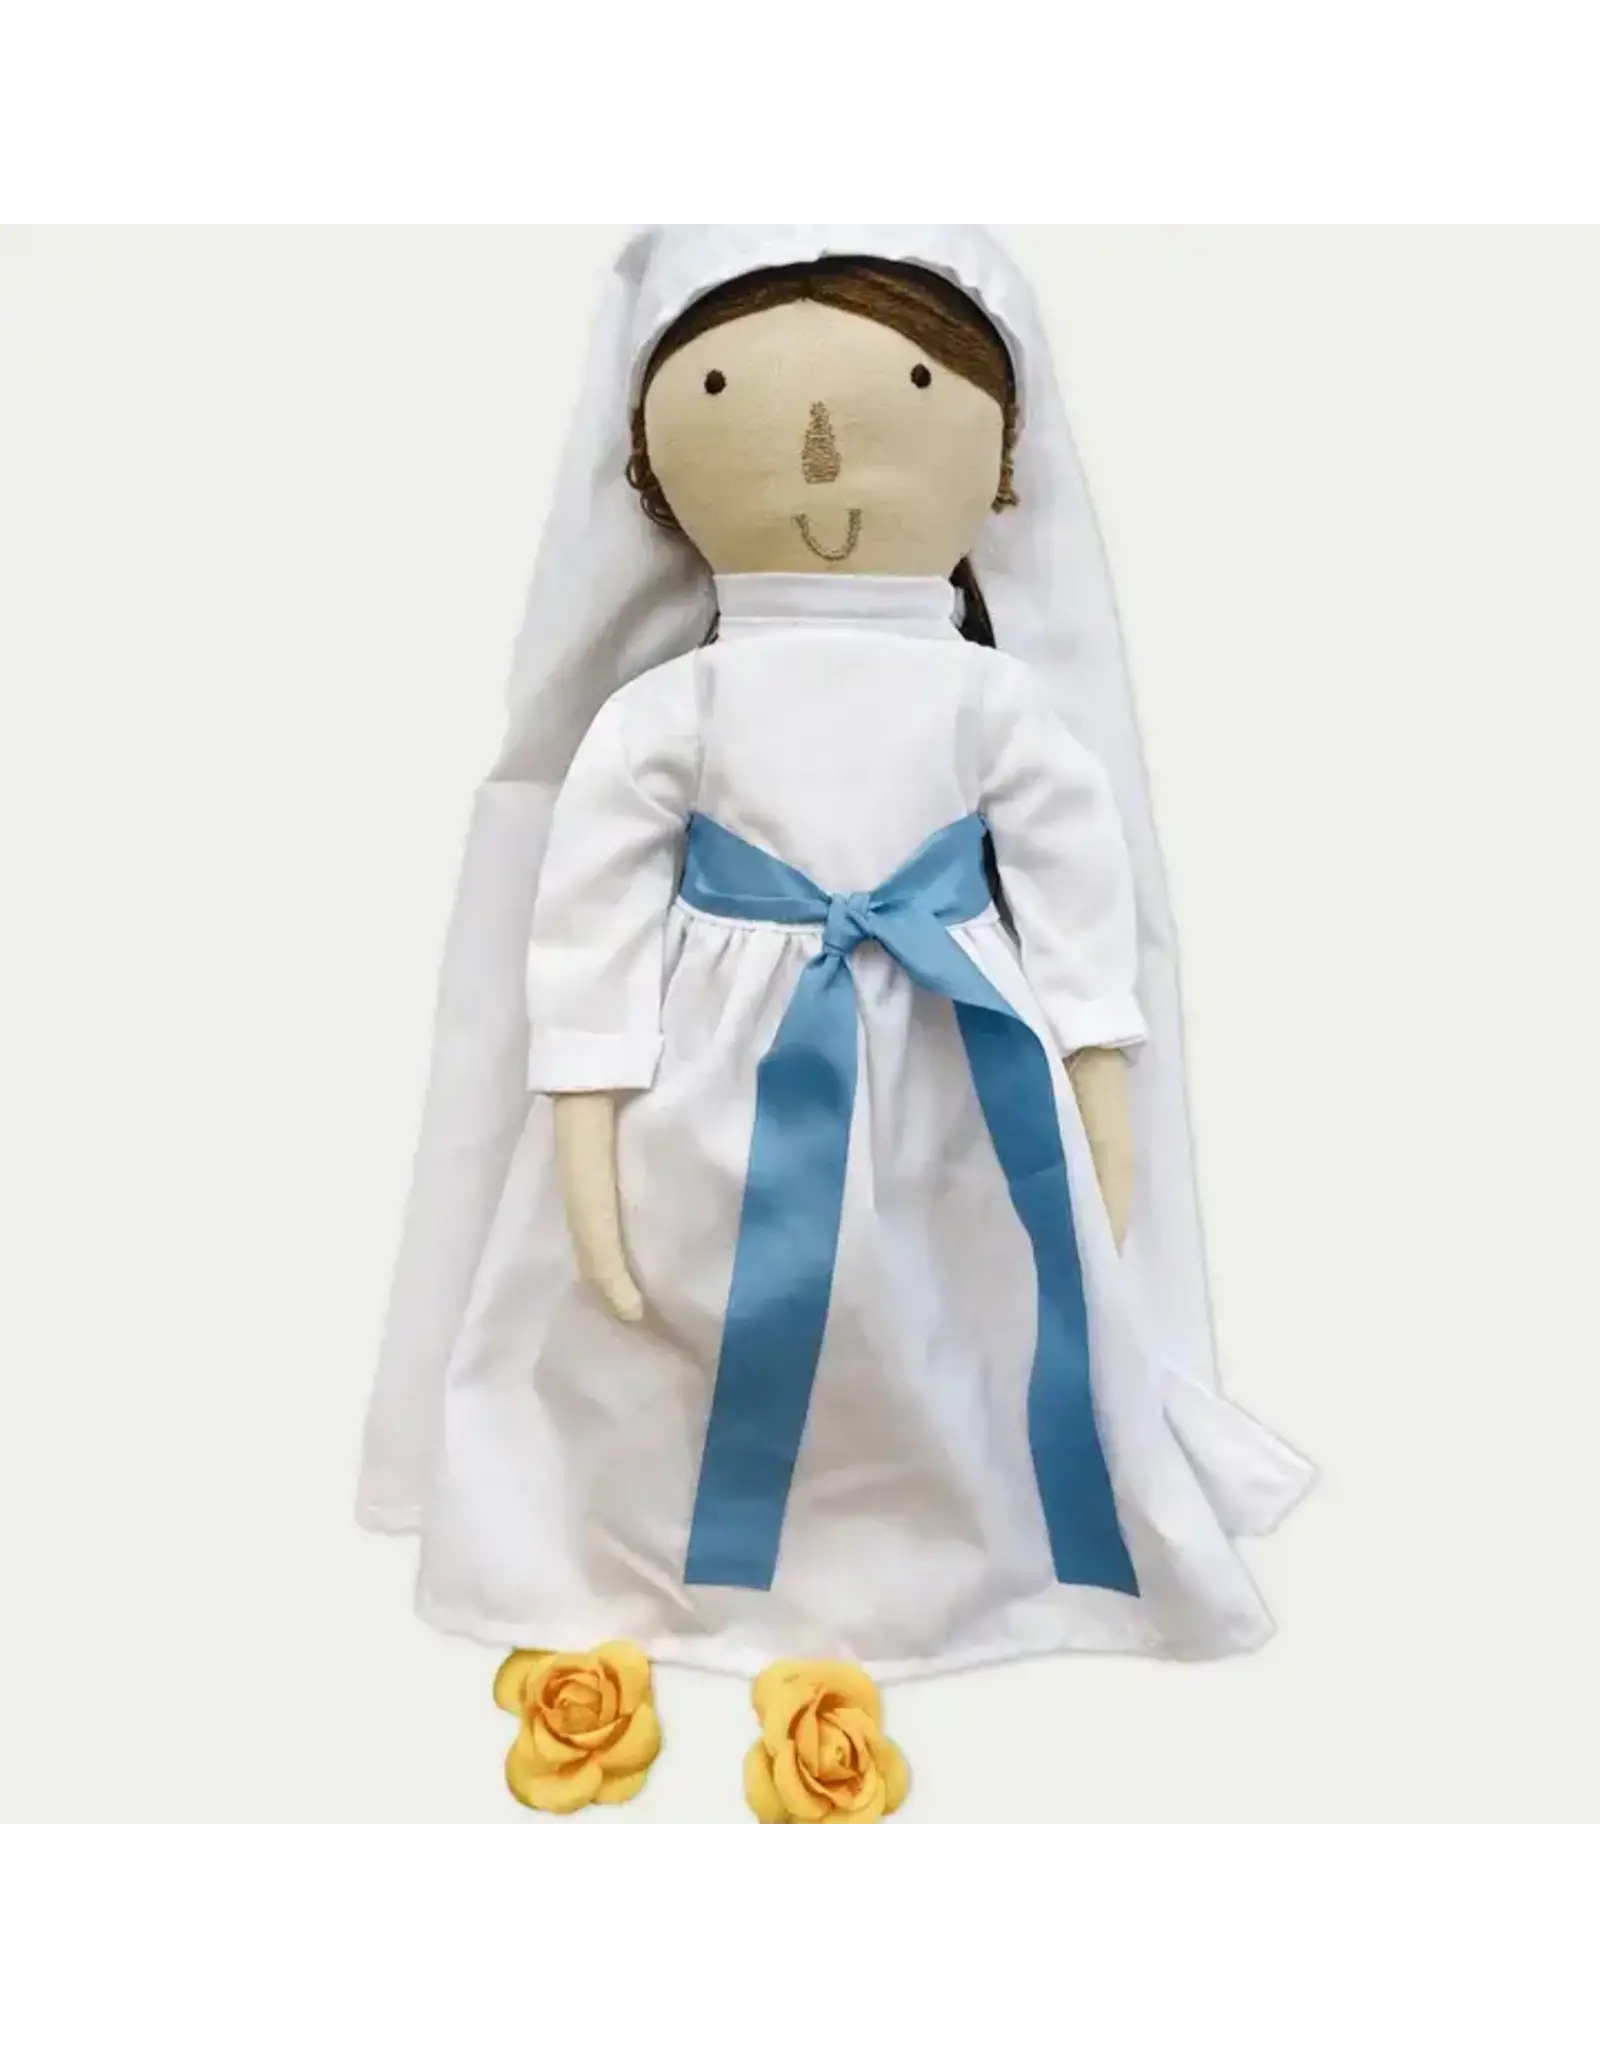 Be a Heart Doll Outfit - Our Lady of Lourdes